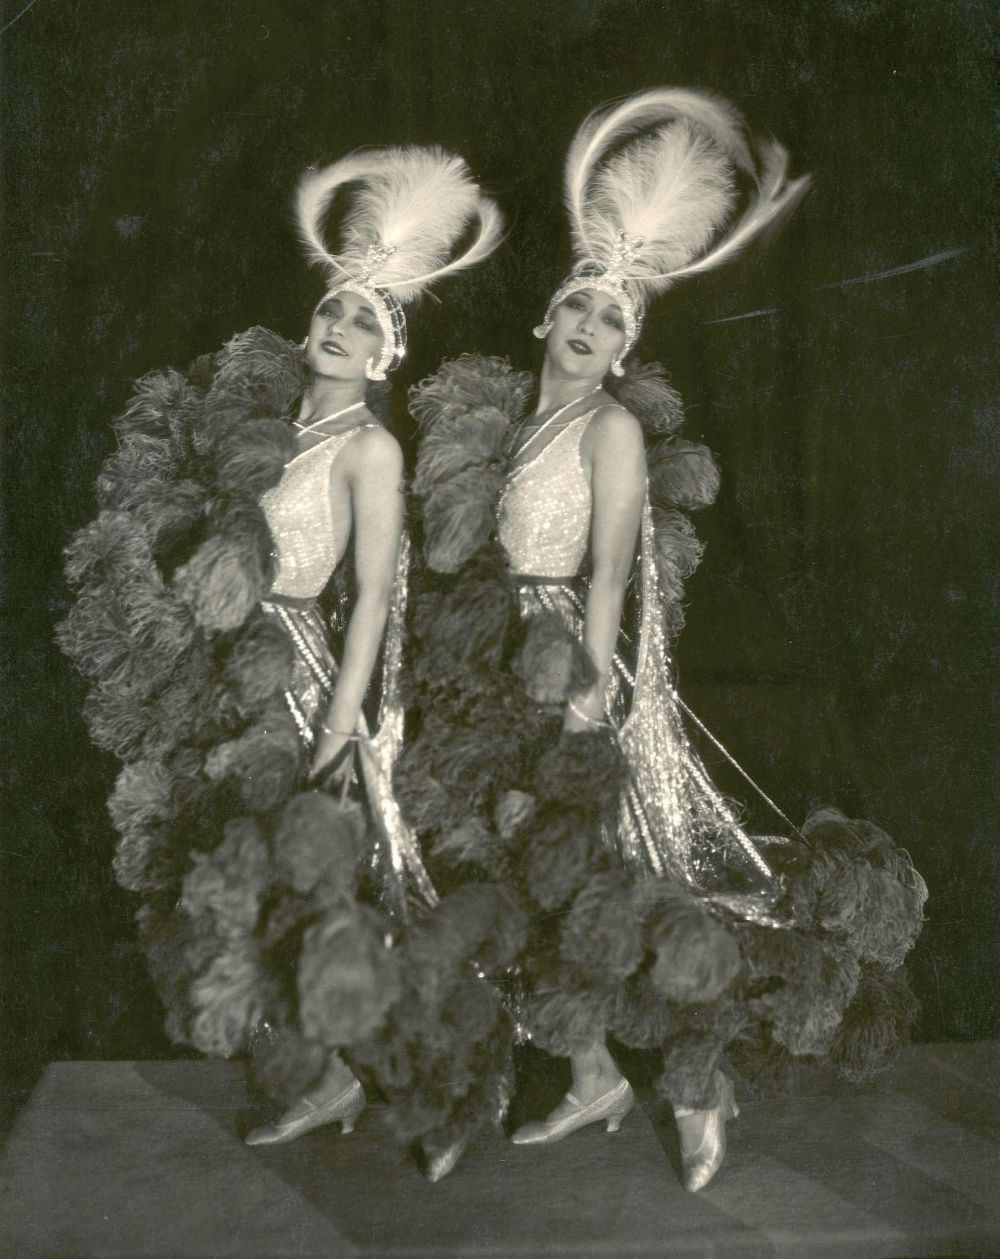 The Dolly Sisters (Jenny and Rosie), in ‘Paris Sans Voiles’ at the Ambassadeurs Theatre, Paris, 1923.